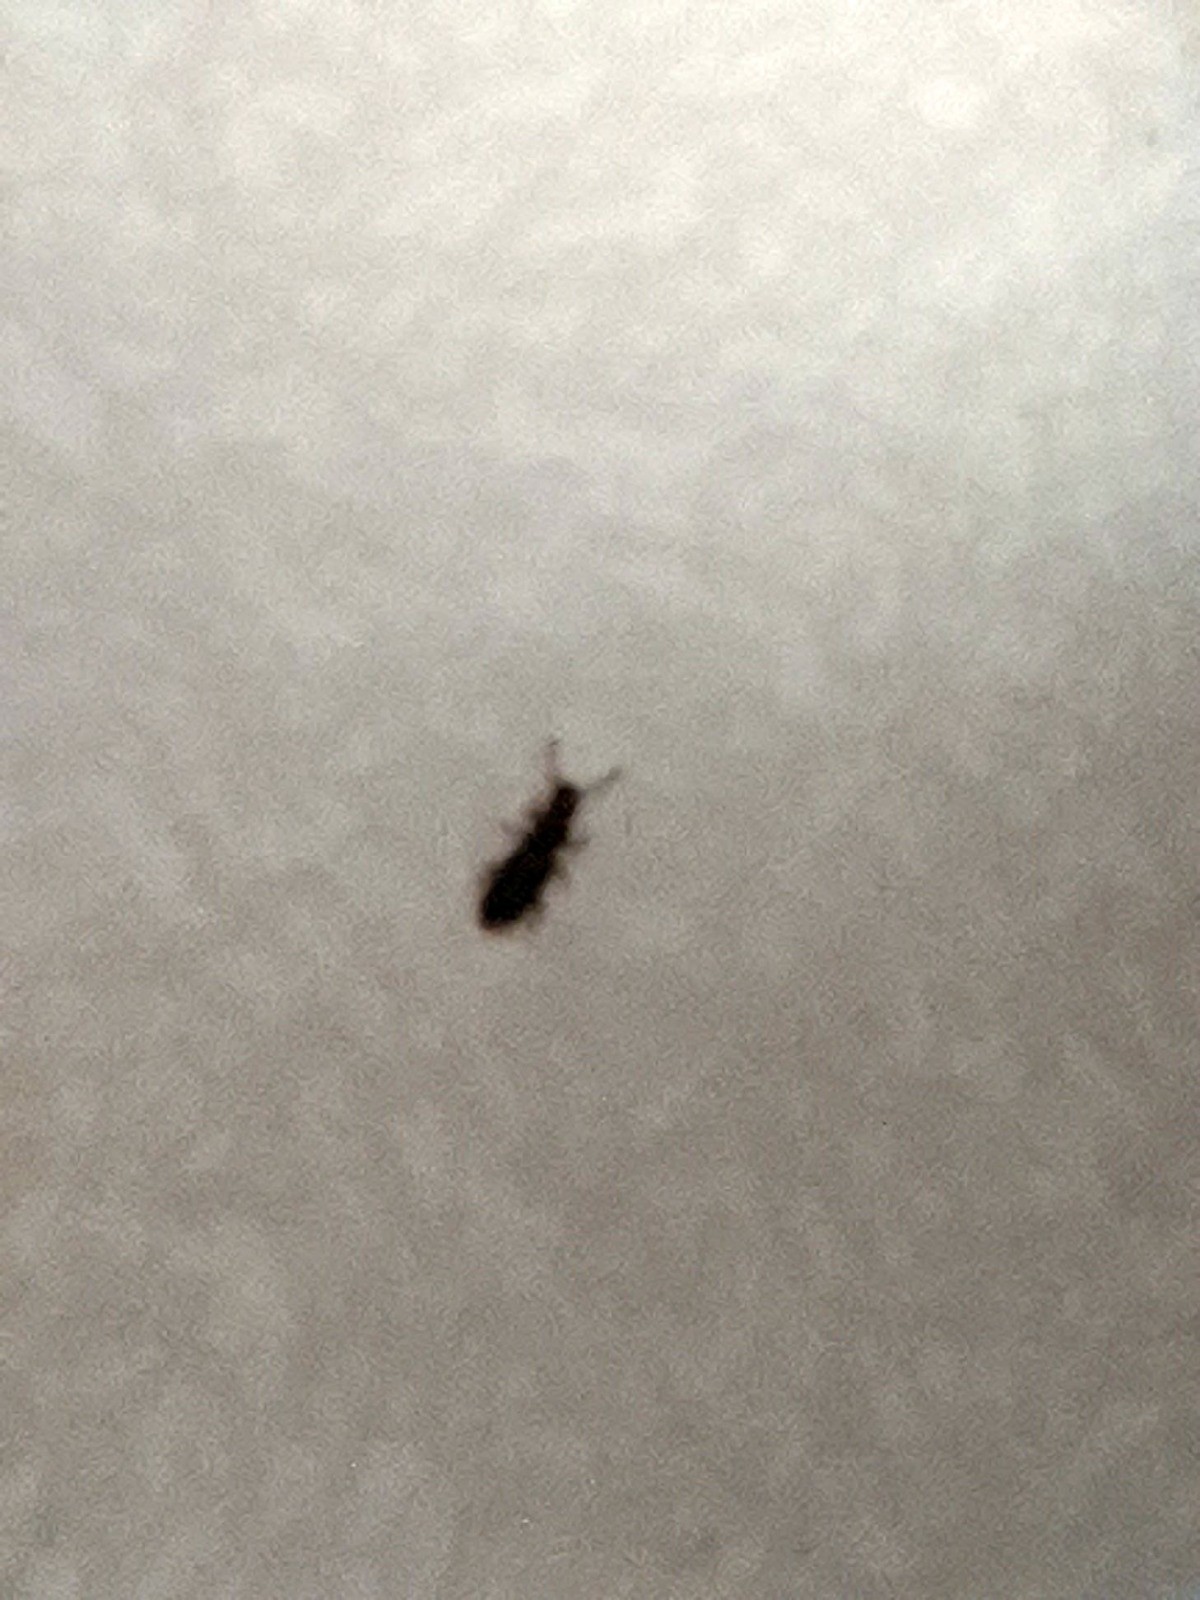 Small Black Bugs In Pantry Foods, Tiny Black Bugs In My Kitchen Cupboard